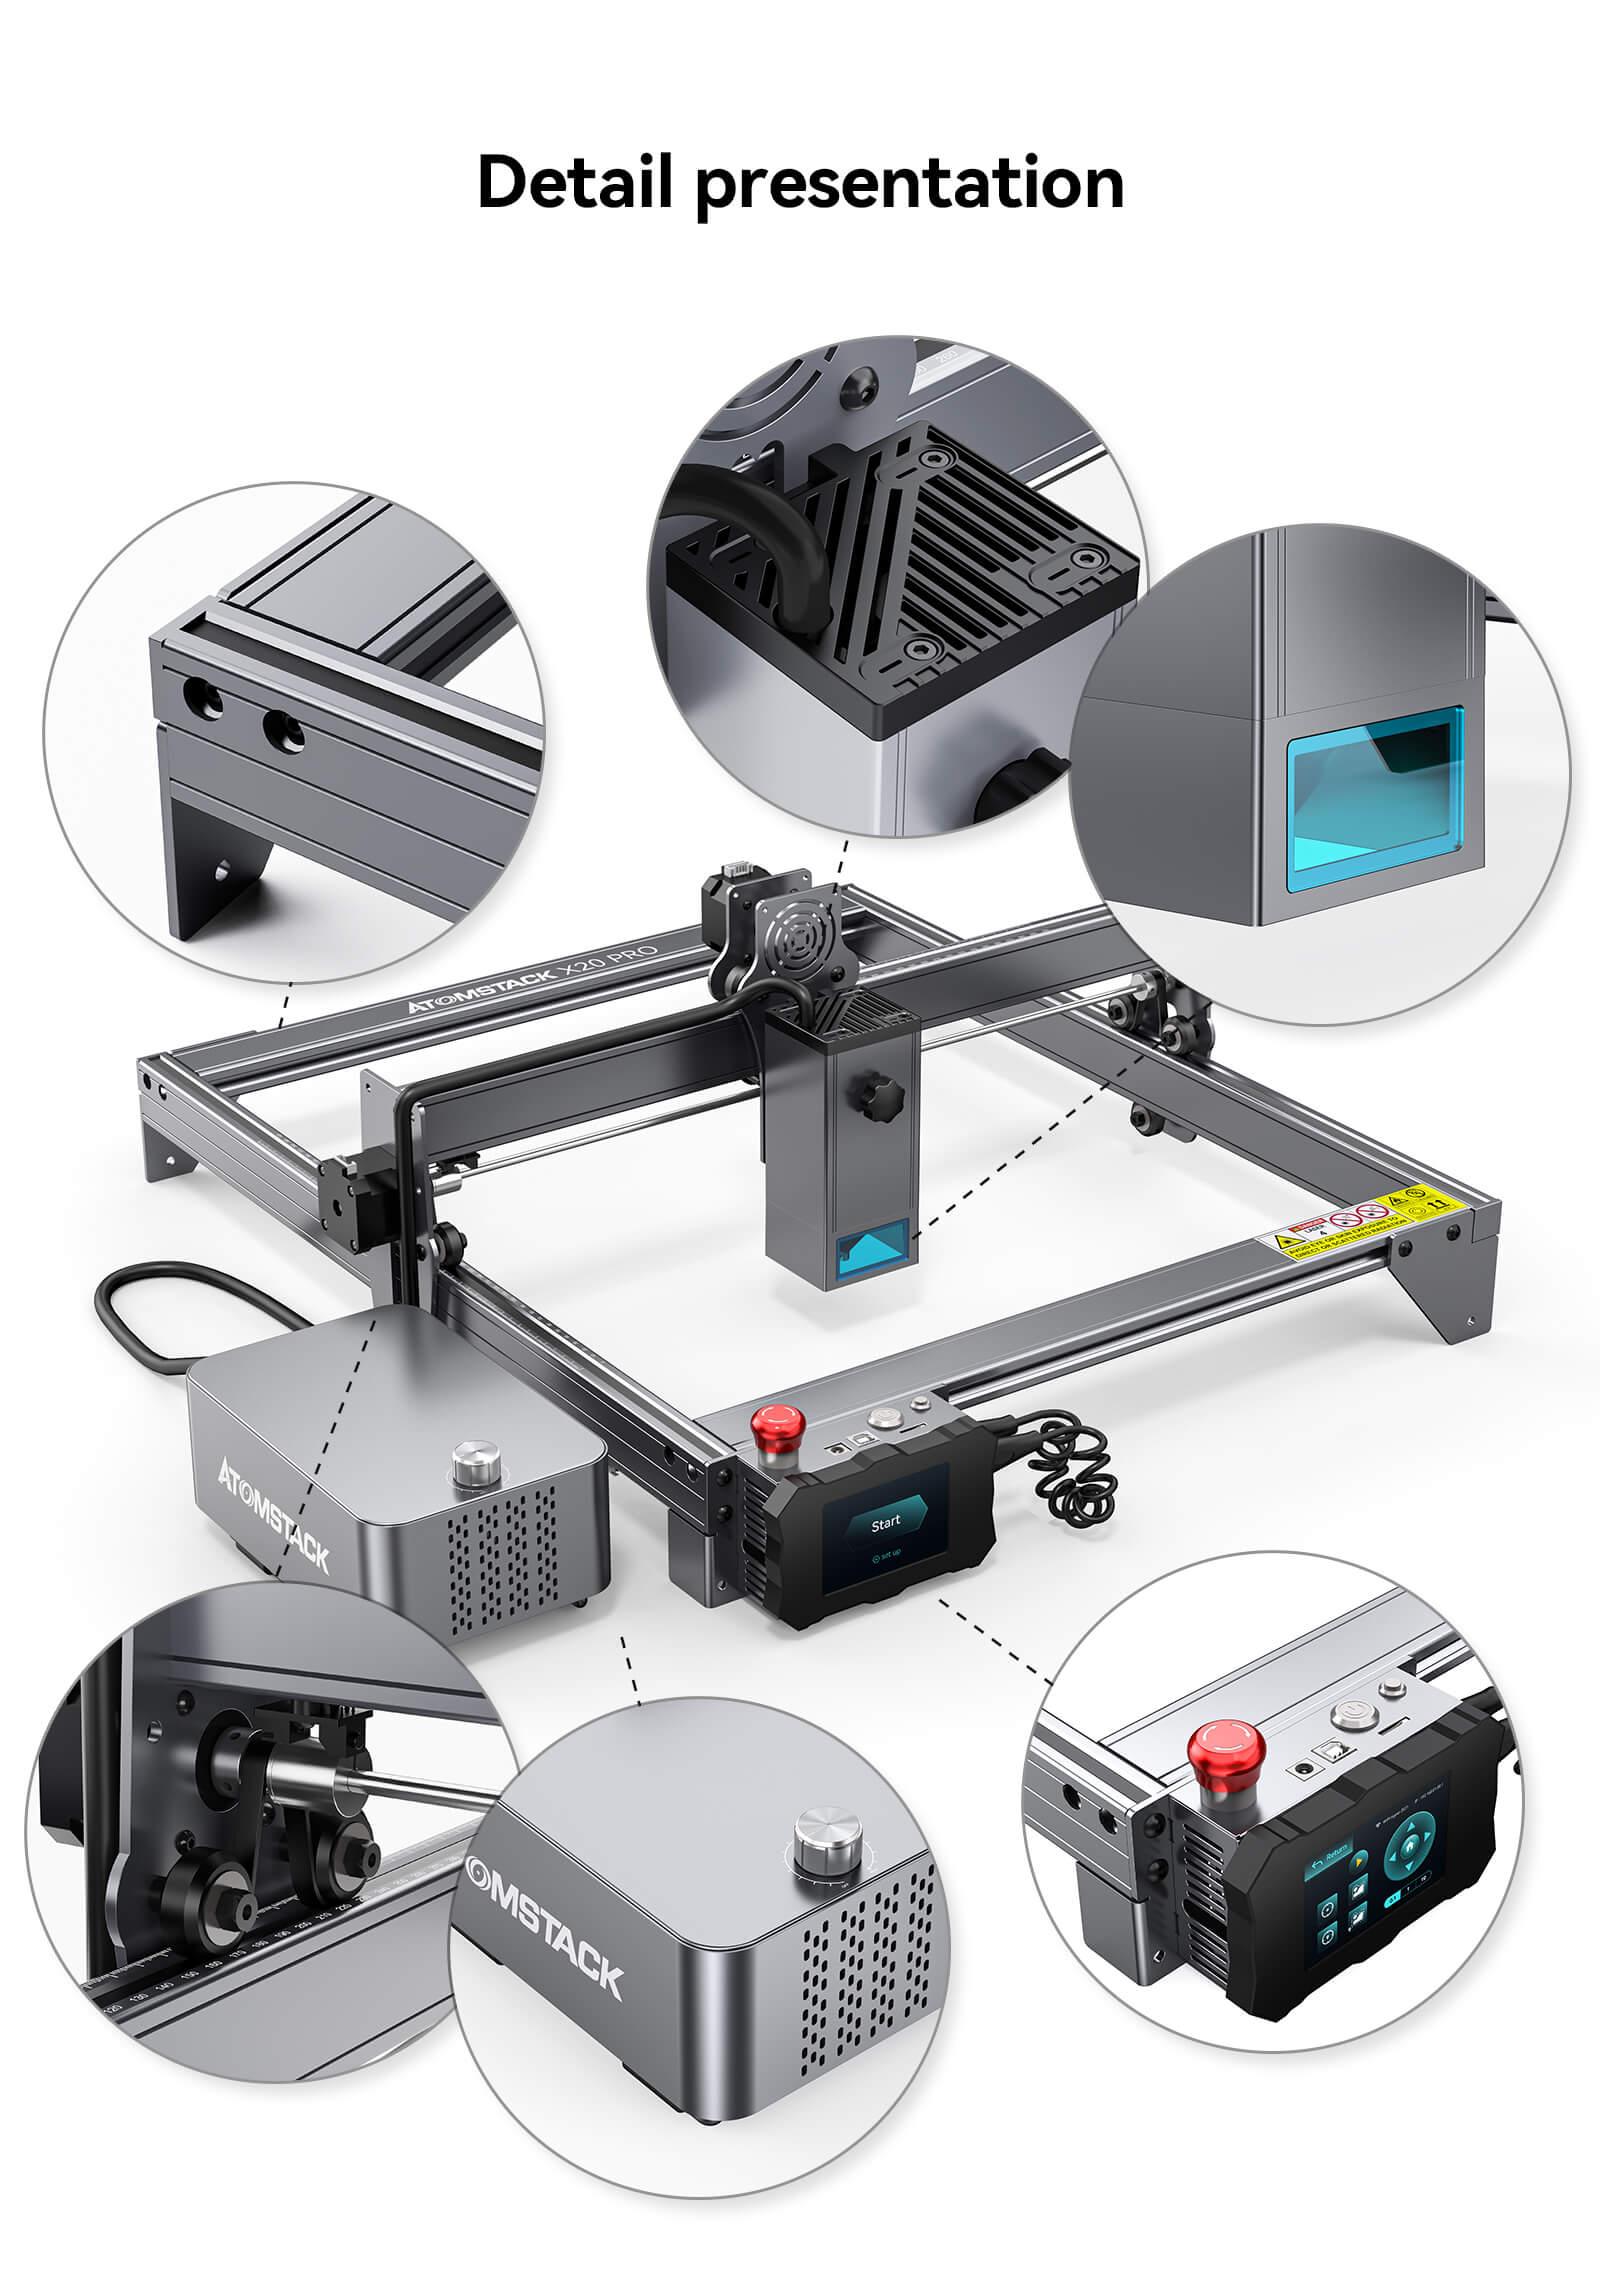 Atomstack X20 Pro 130W Quad-Laser Engraving And Cutting Machine Built-In Air Assist System - Antinsky3d